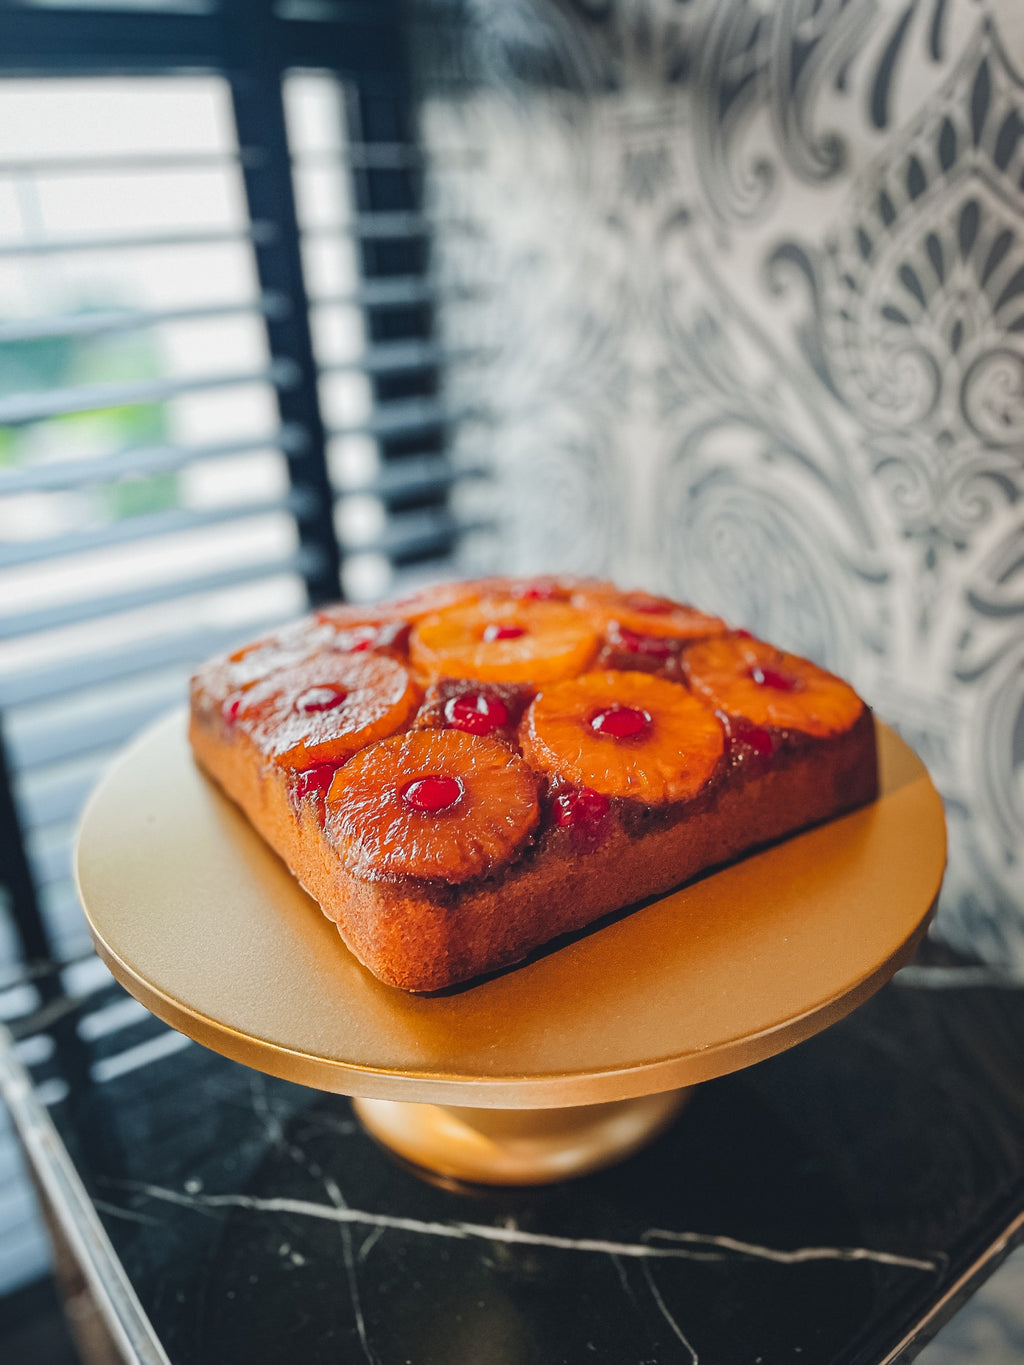 Celebrate special occasions with the Classic Pineapple Upside Down Cake